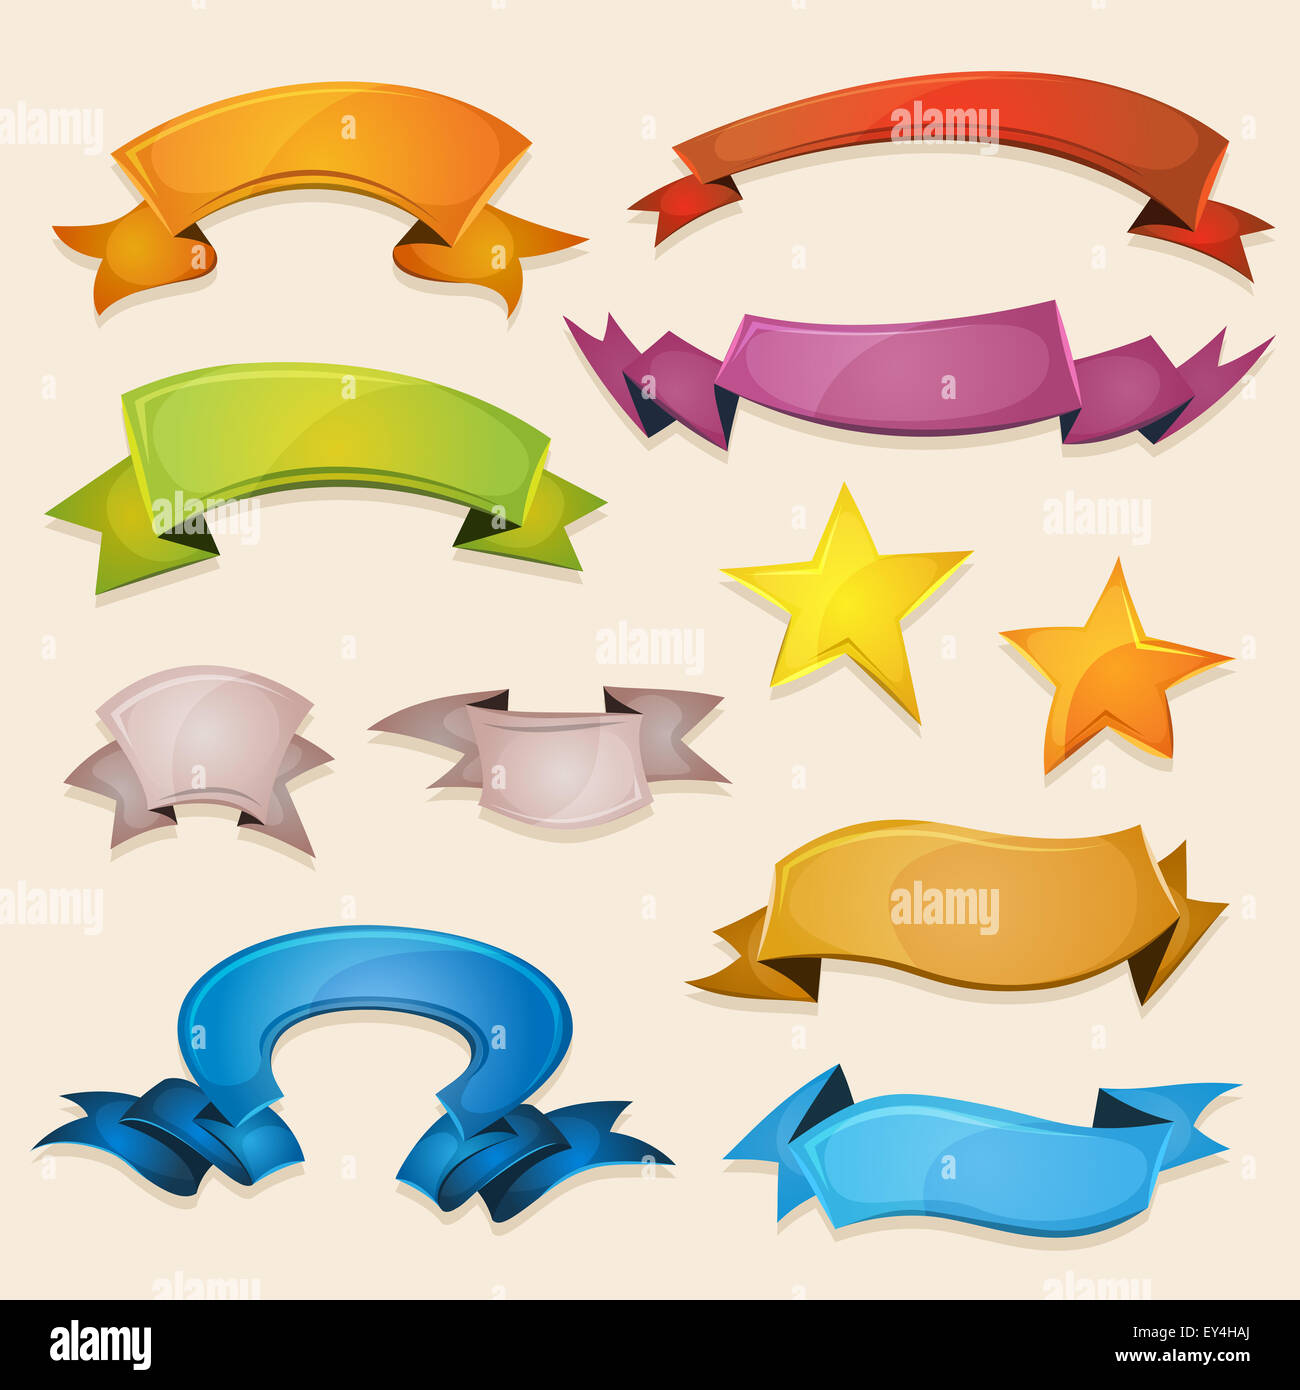 Illustration of a set of various design fresh colorful banners, ribbons, swirls, awards and scrolls to use for example as elemen Stock Photo